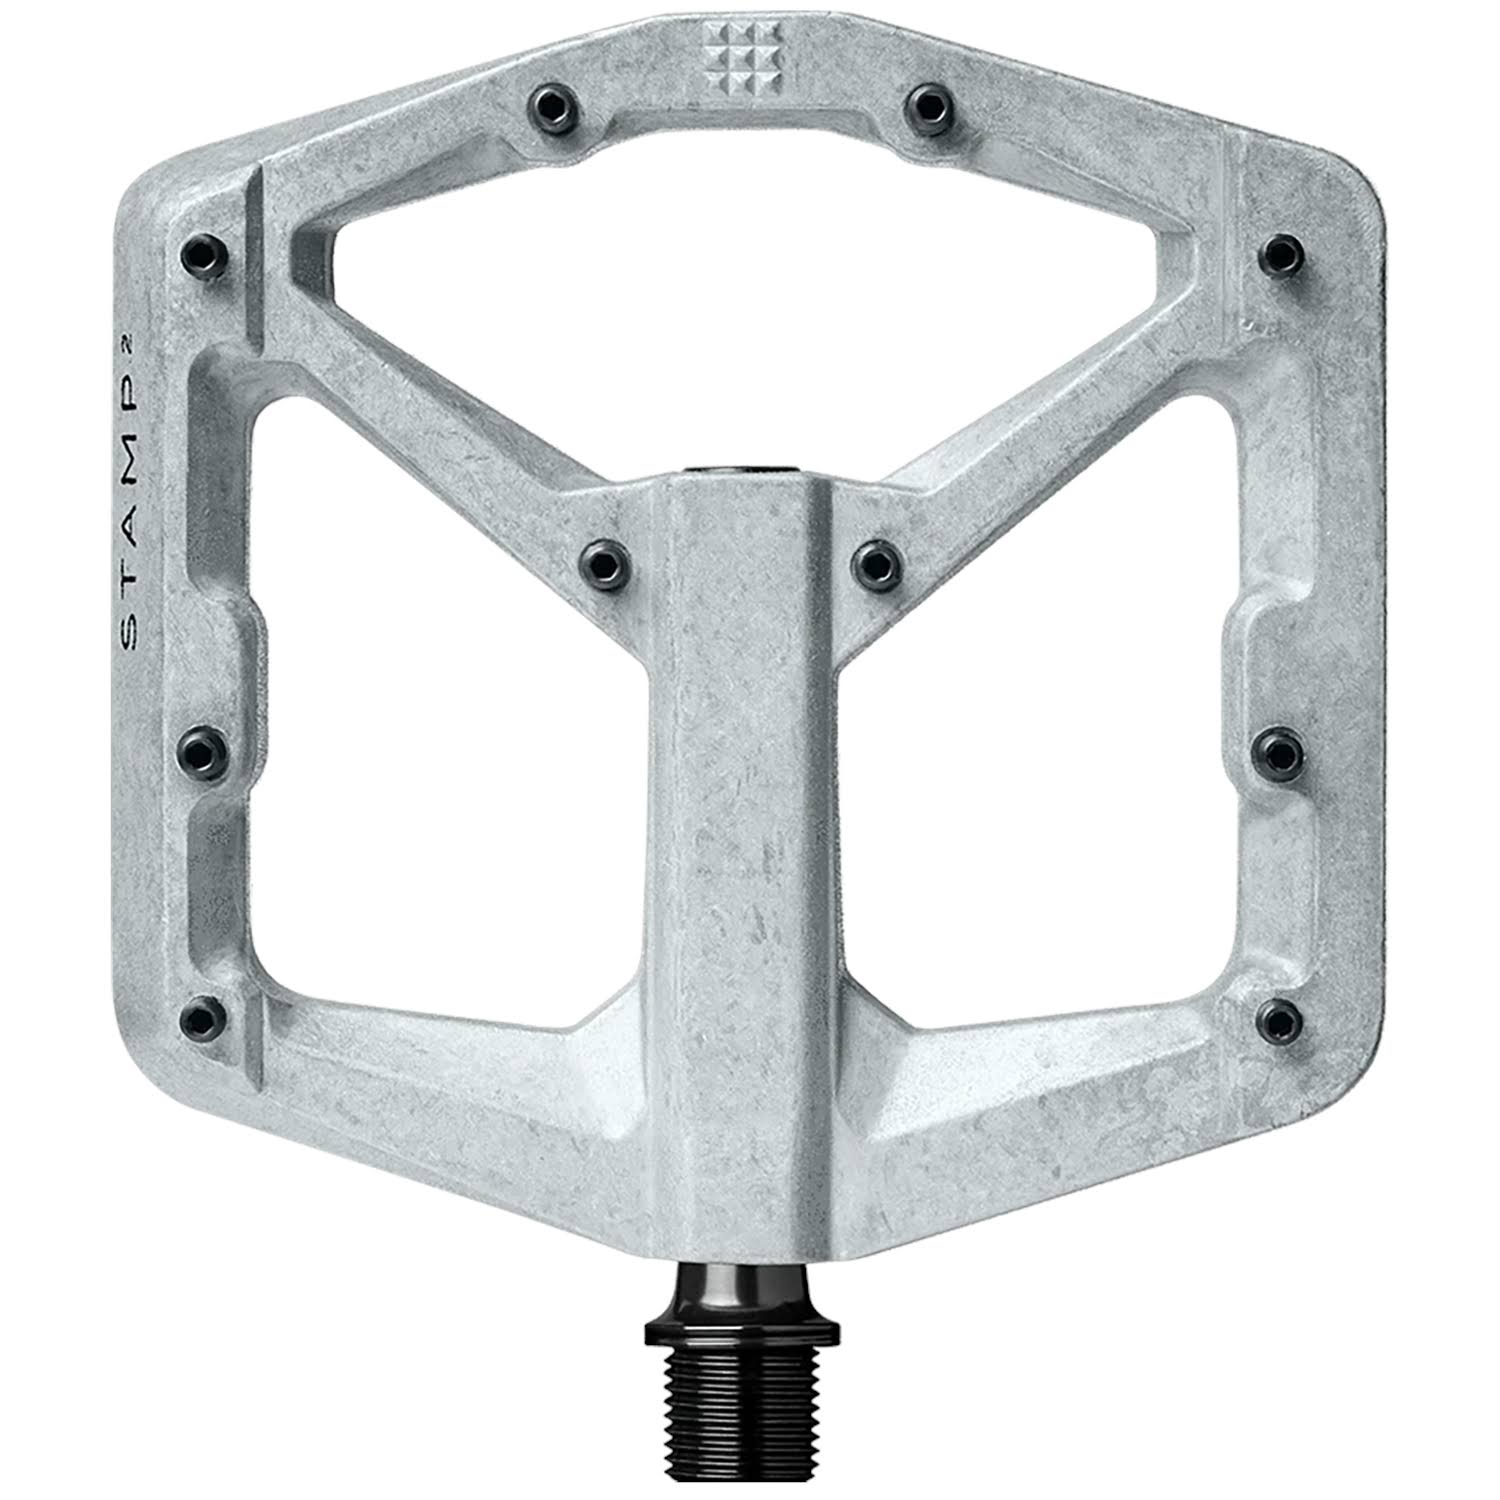 Crank Brothers Stamp 2 Large Pedals, Raw Silver